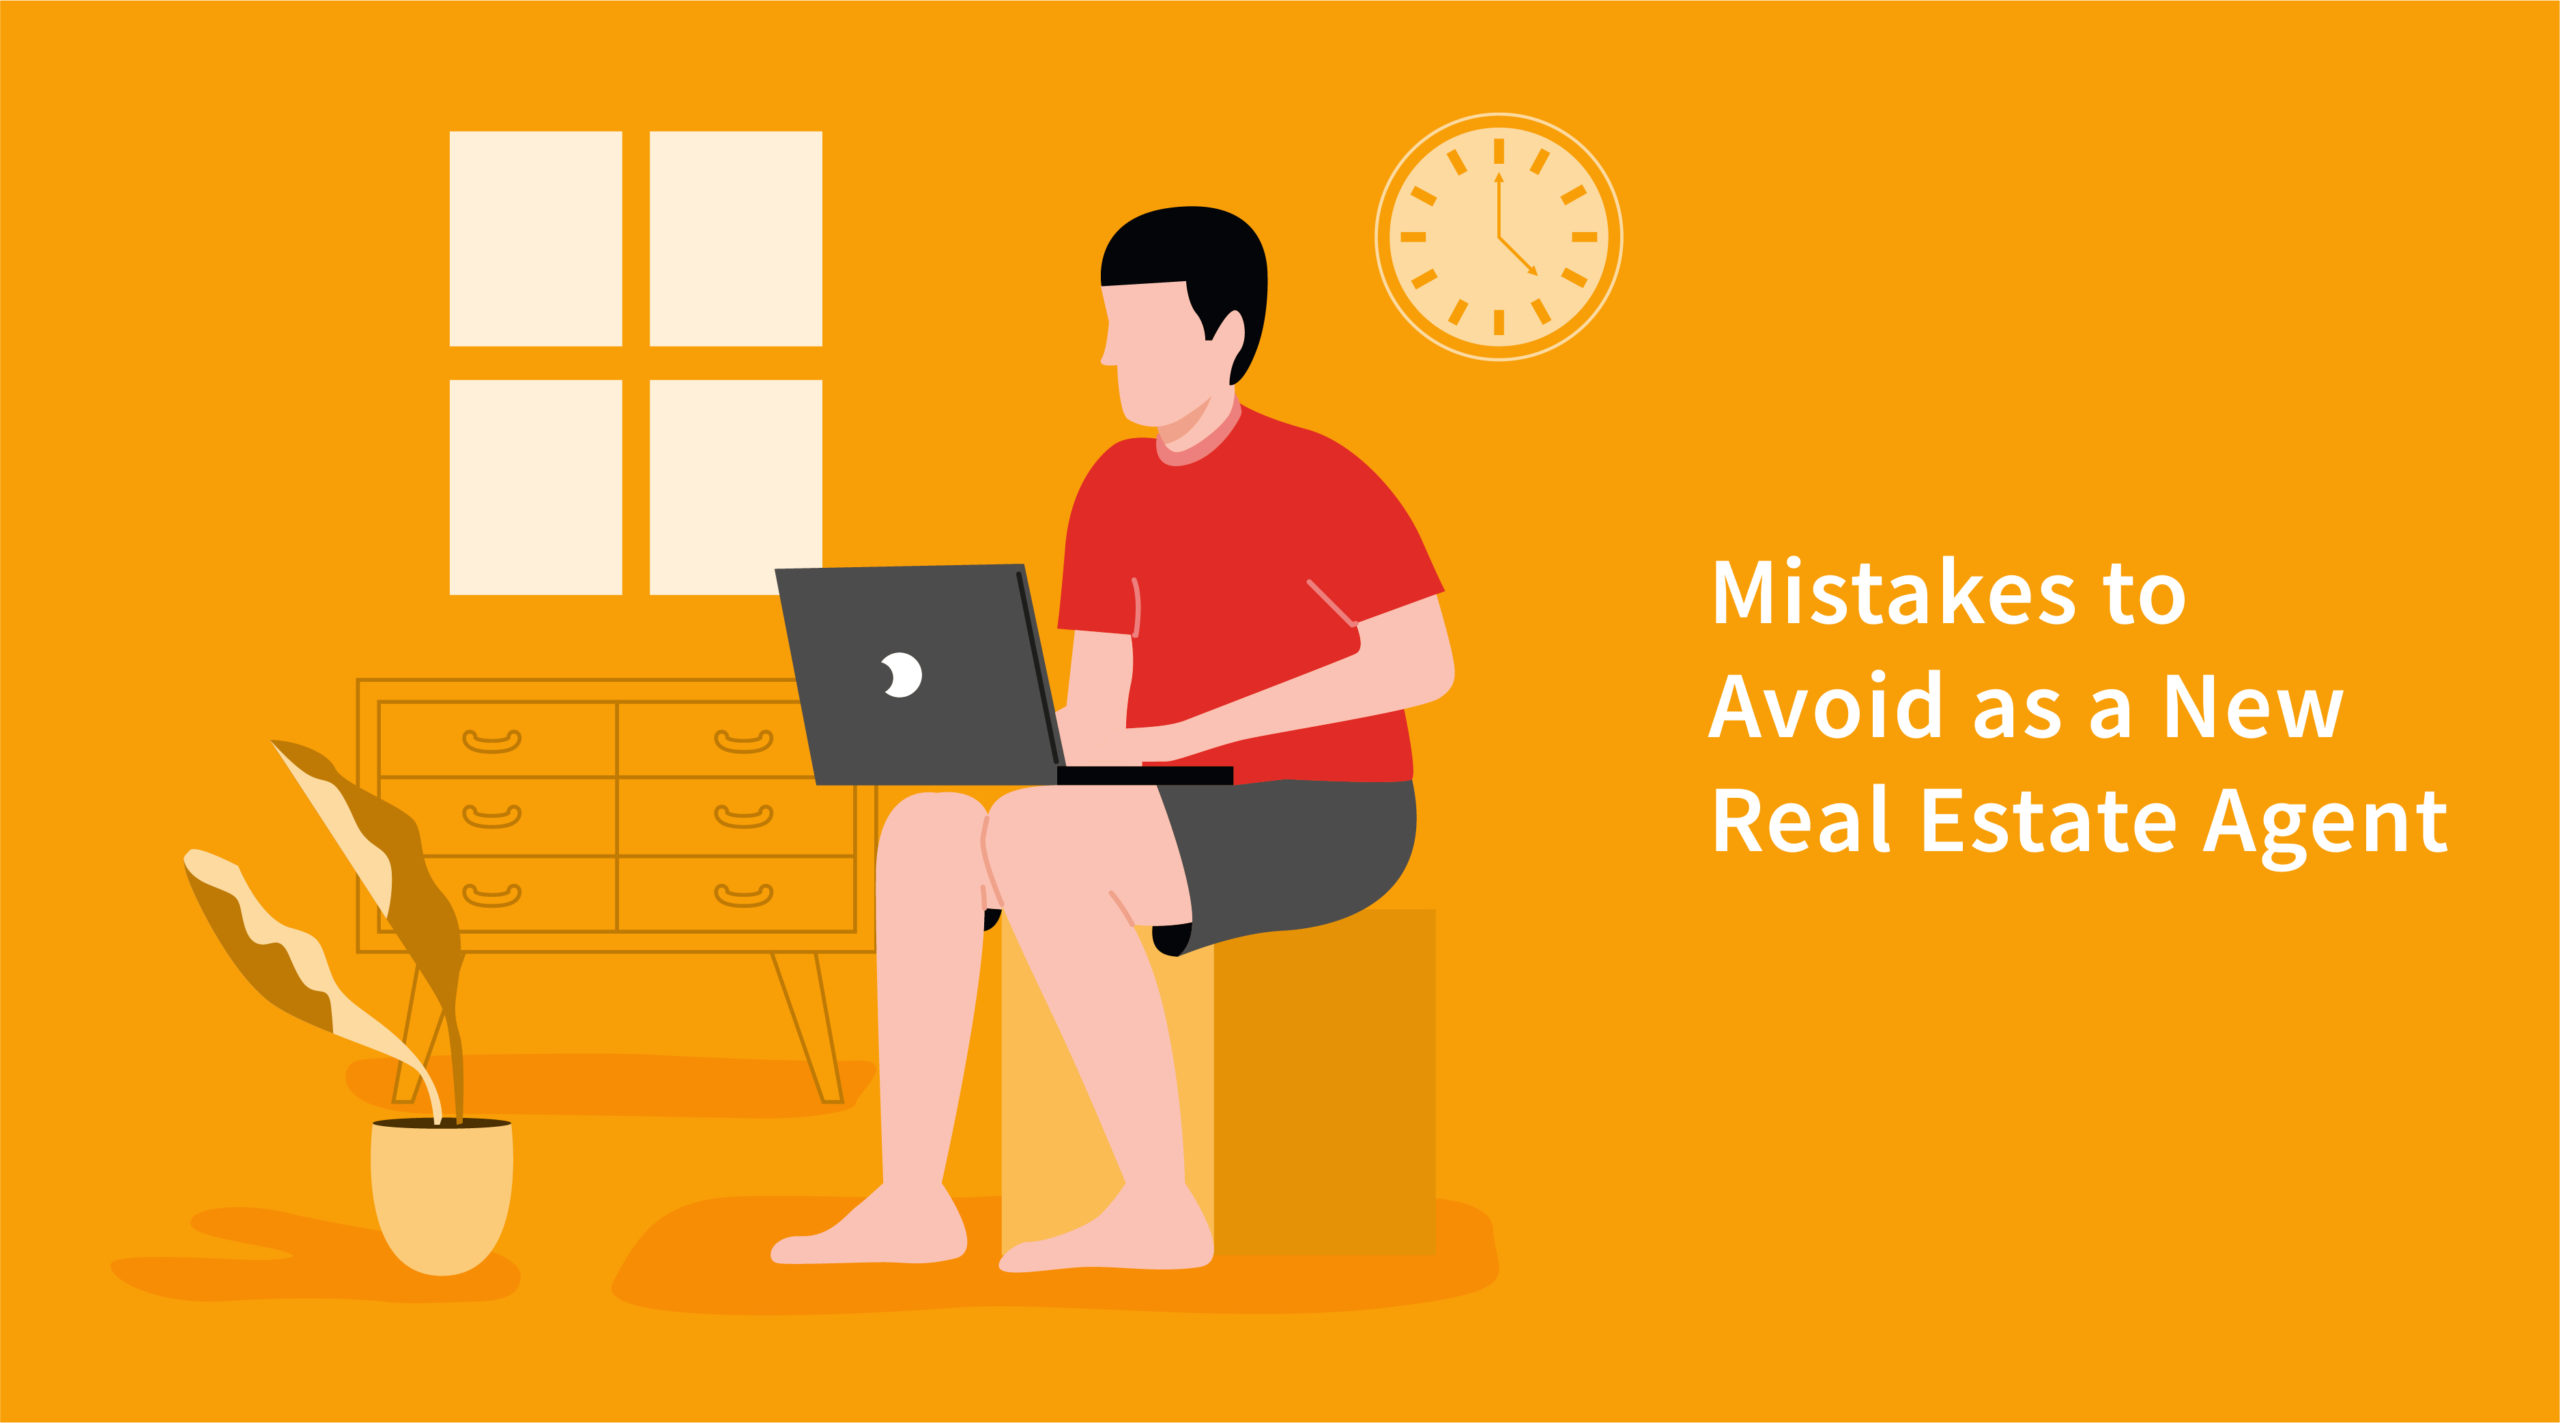 Top 6 Mistakes to Avoid as a New Real Estate Agent